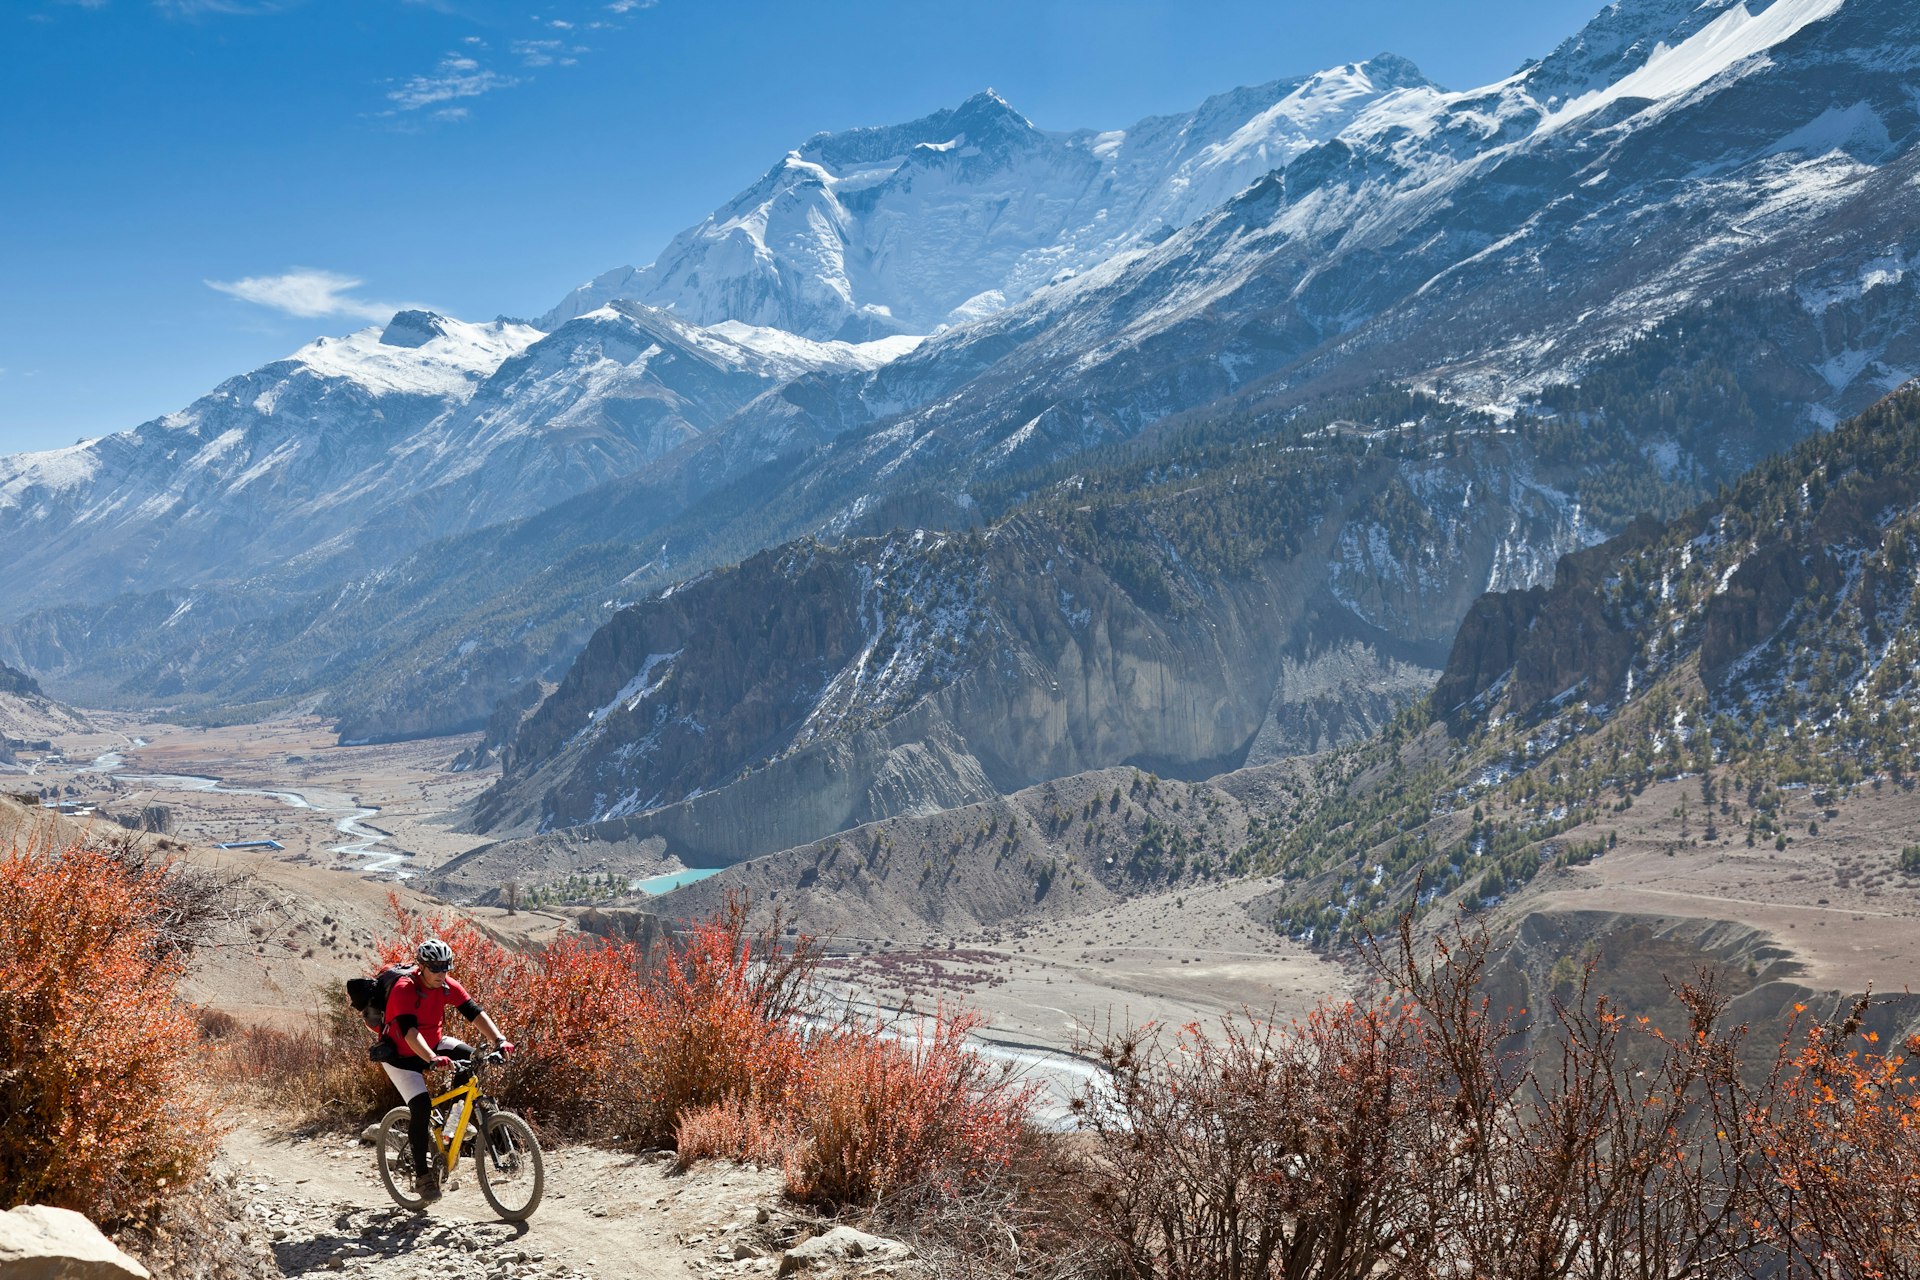 A male mountain biker has left the village of Manang and is climbing towards Thorong La in a scenery landscape on the Annapurna Circuit, Nepal. On the right side the summits of Annapurna III and Gangapurna 